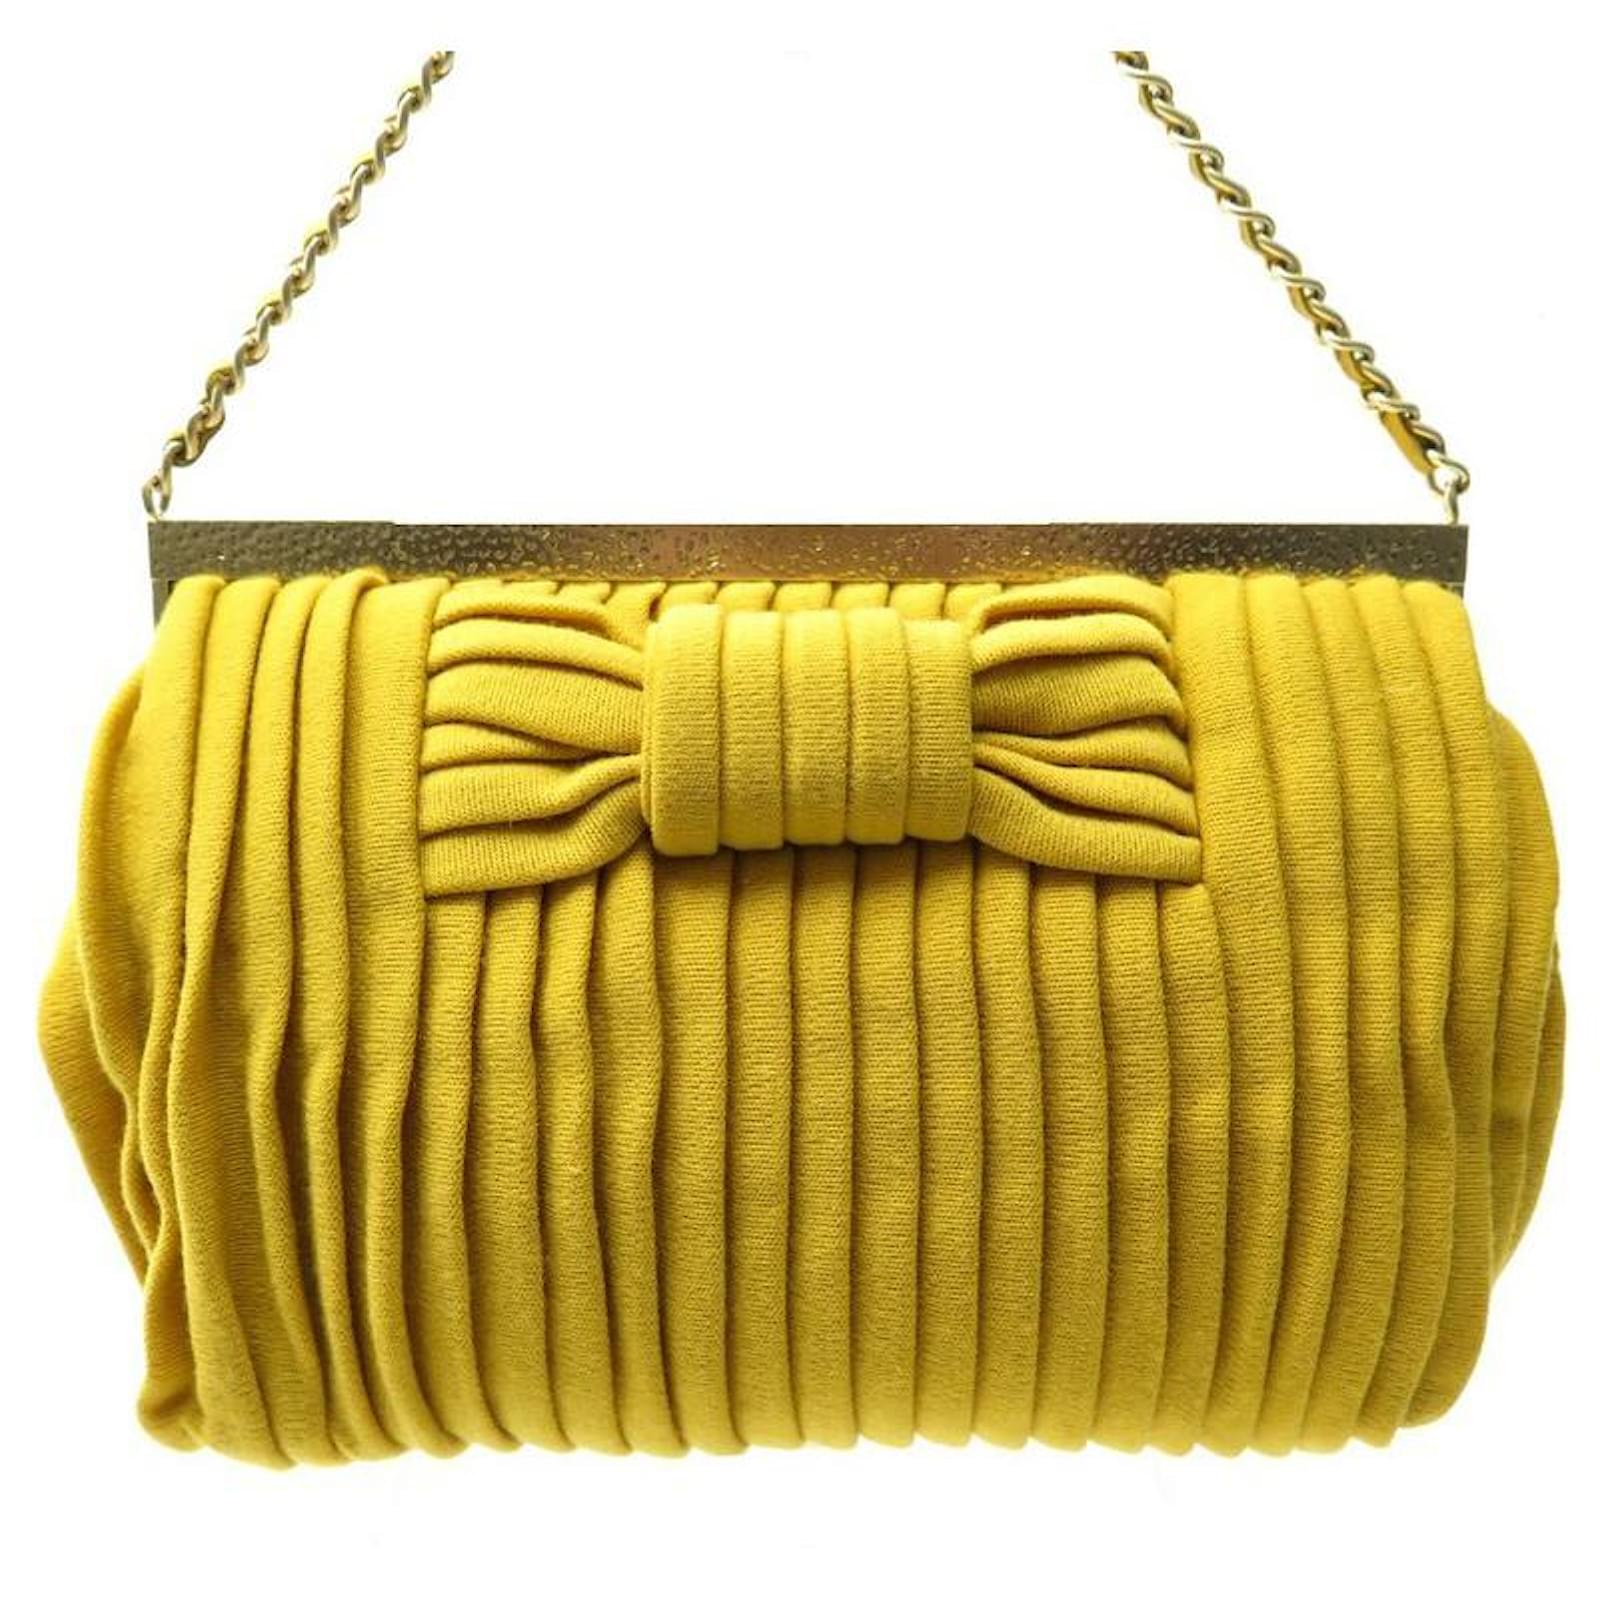 Handbags Chanel New Chanel Pouch Knot Pouch in Yellow Pleated Fabric New Hand Bag Purse